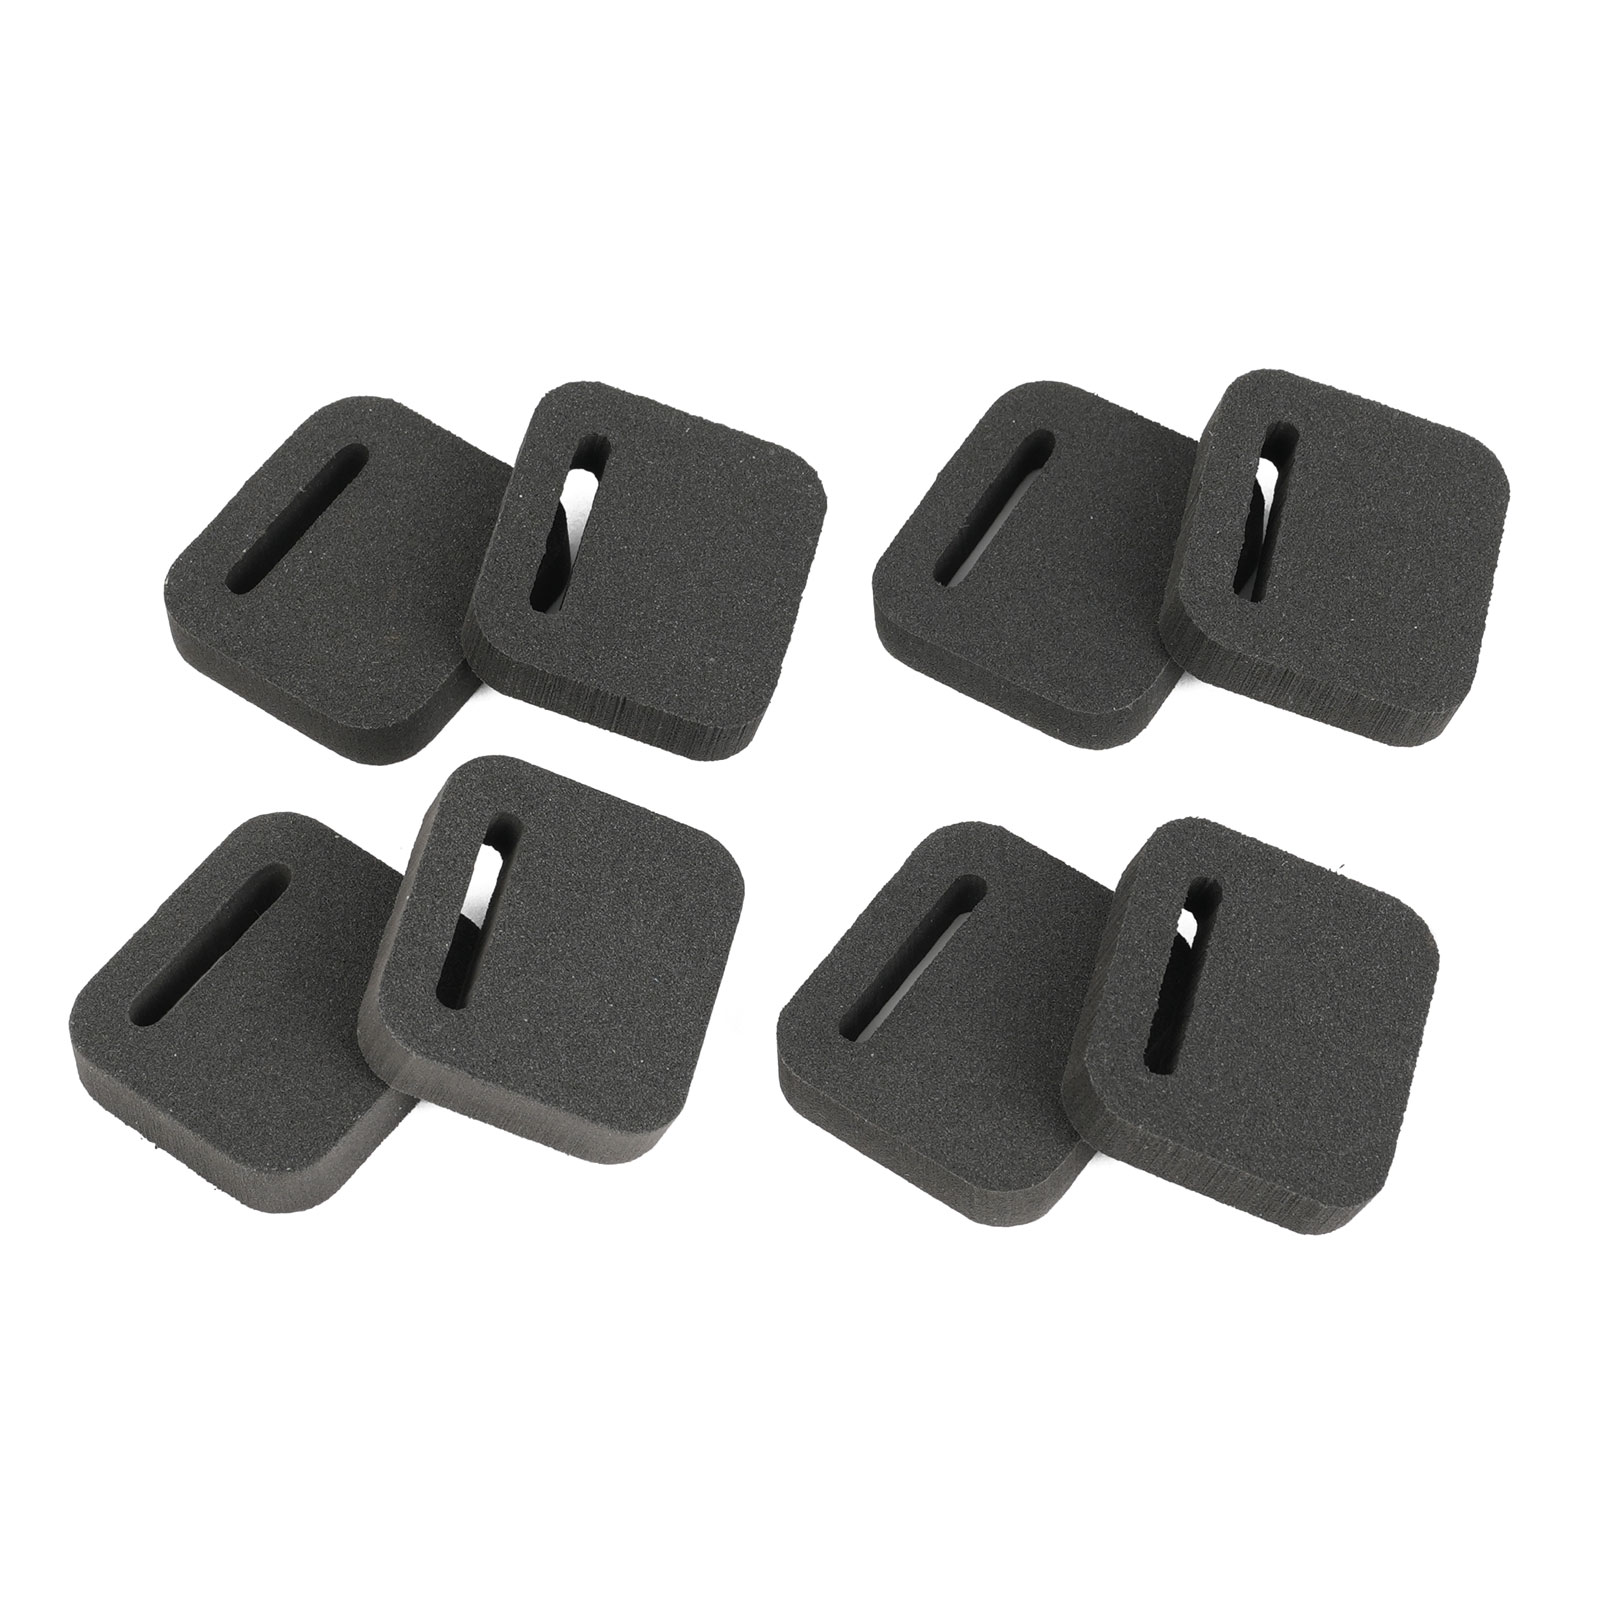 Picture of Revelate Designs Foam Spacers for Sweetroll or Pronghorn - 8pcs